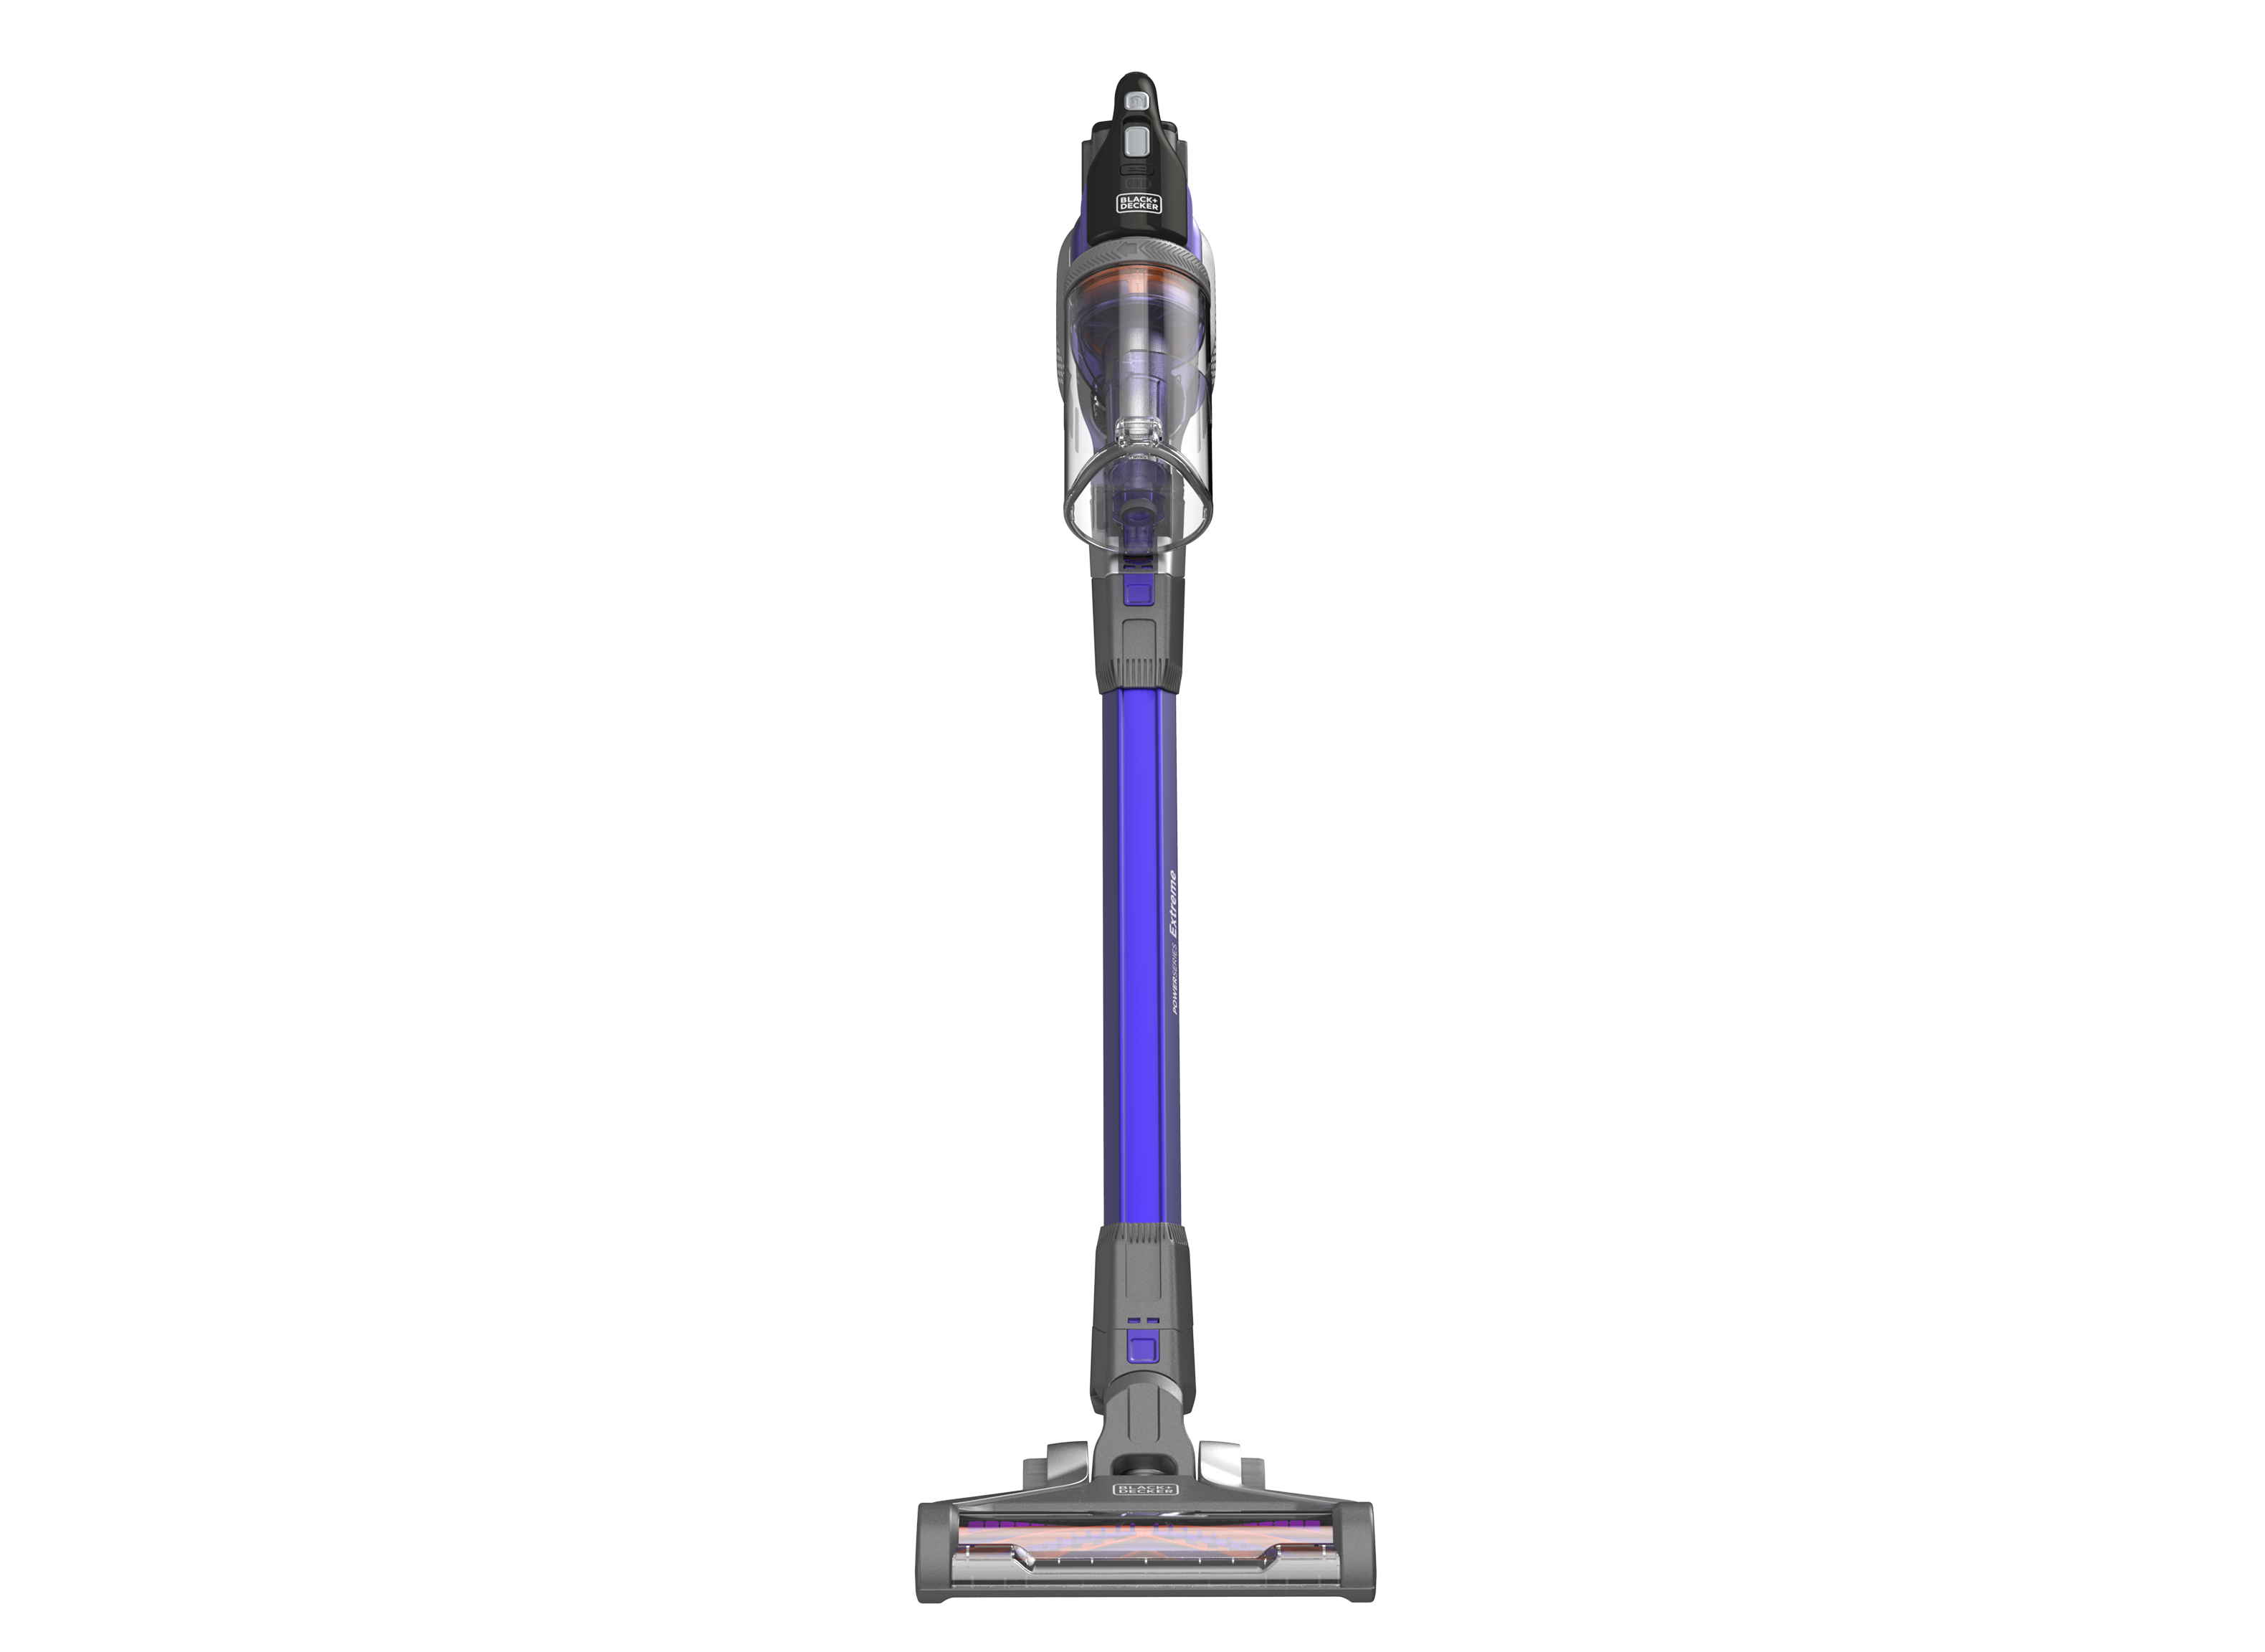 https://crdms.images.consumerreports.org/prod/products/cr/models/400852-stick-vacuums-greater-than-6-lbs-black-decker-powerseries-extreme-bsv2020p-10012158.png